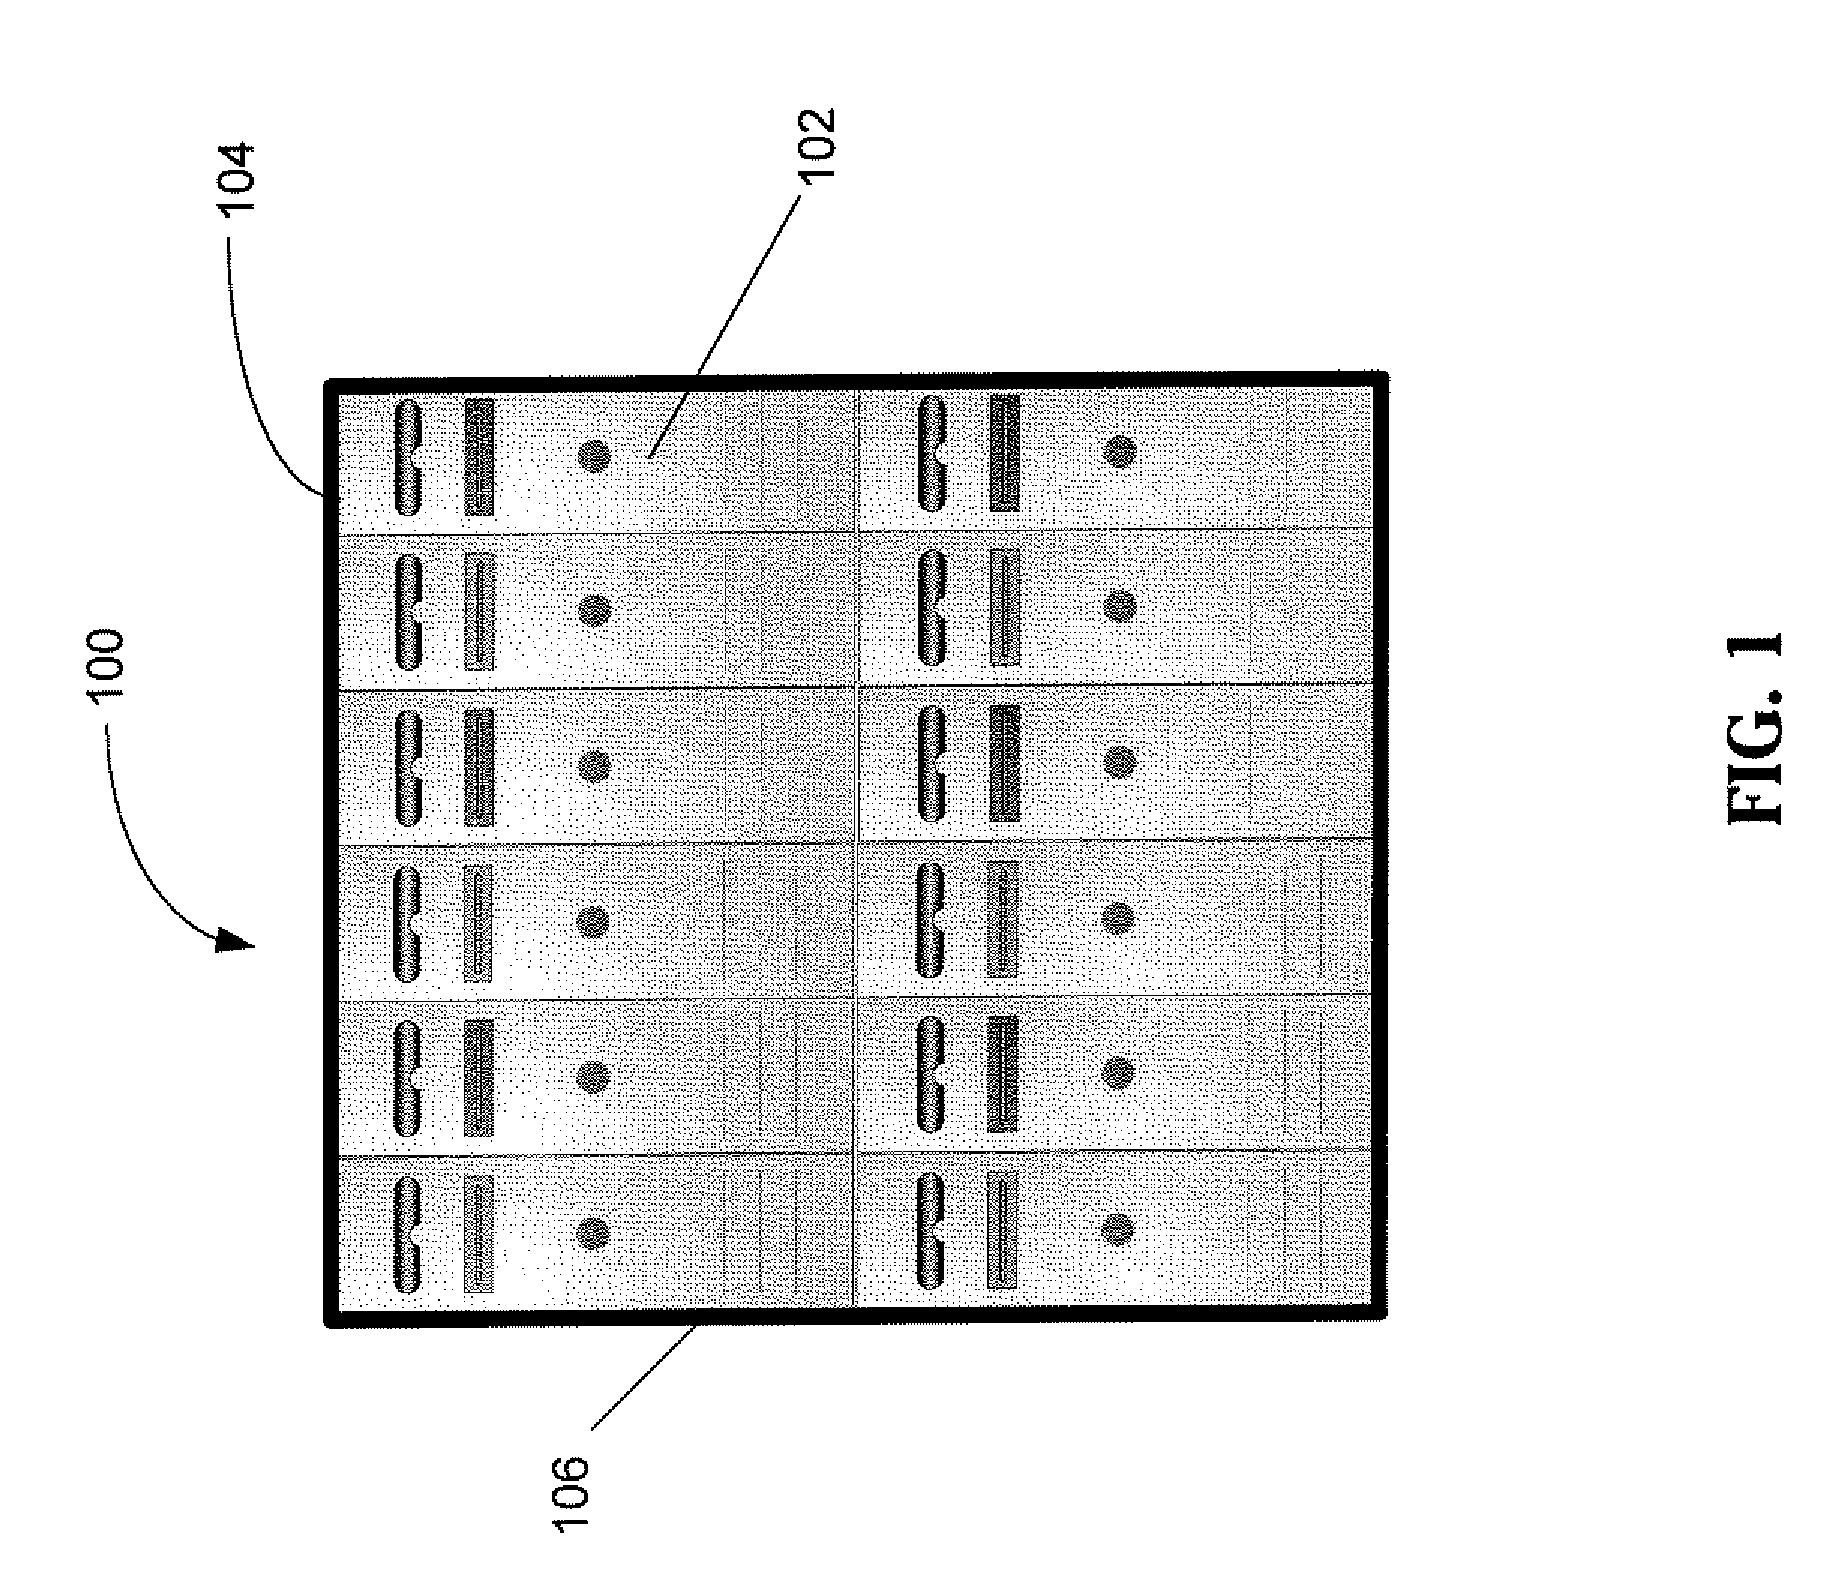 Methods and systems for using a storage device to control and manage external cooling devices